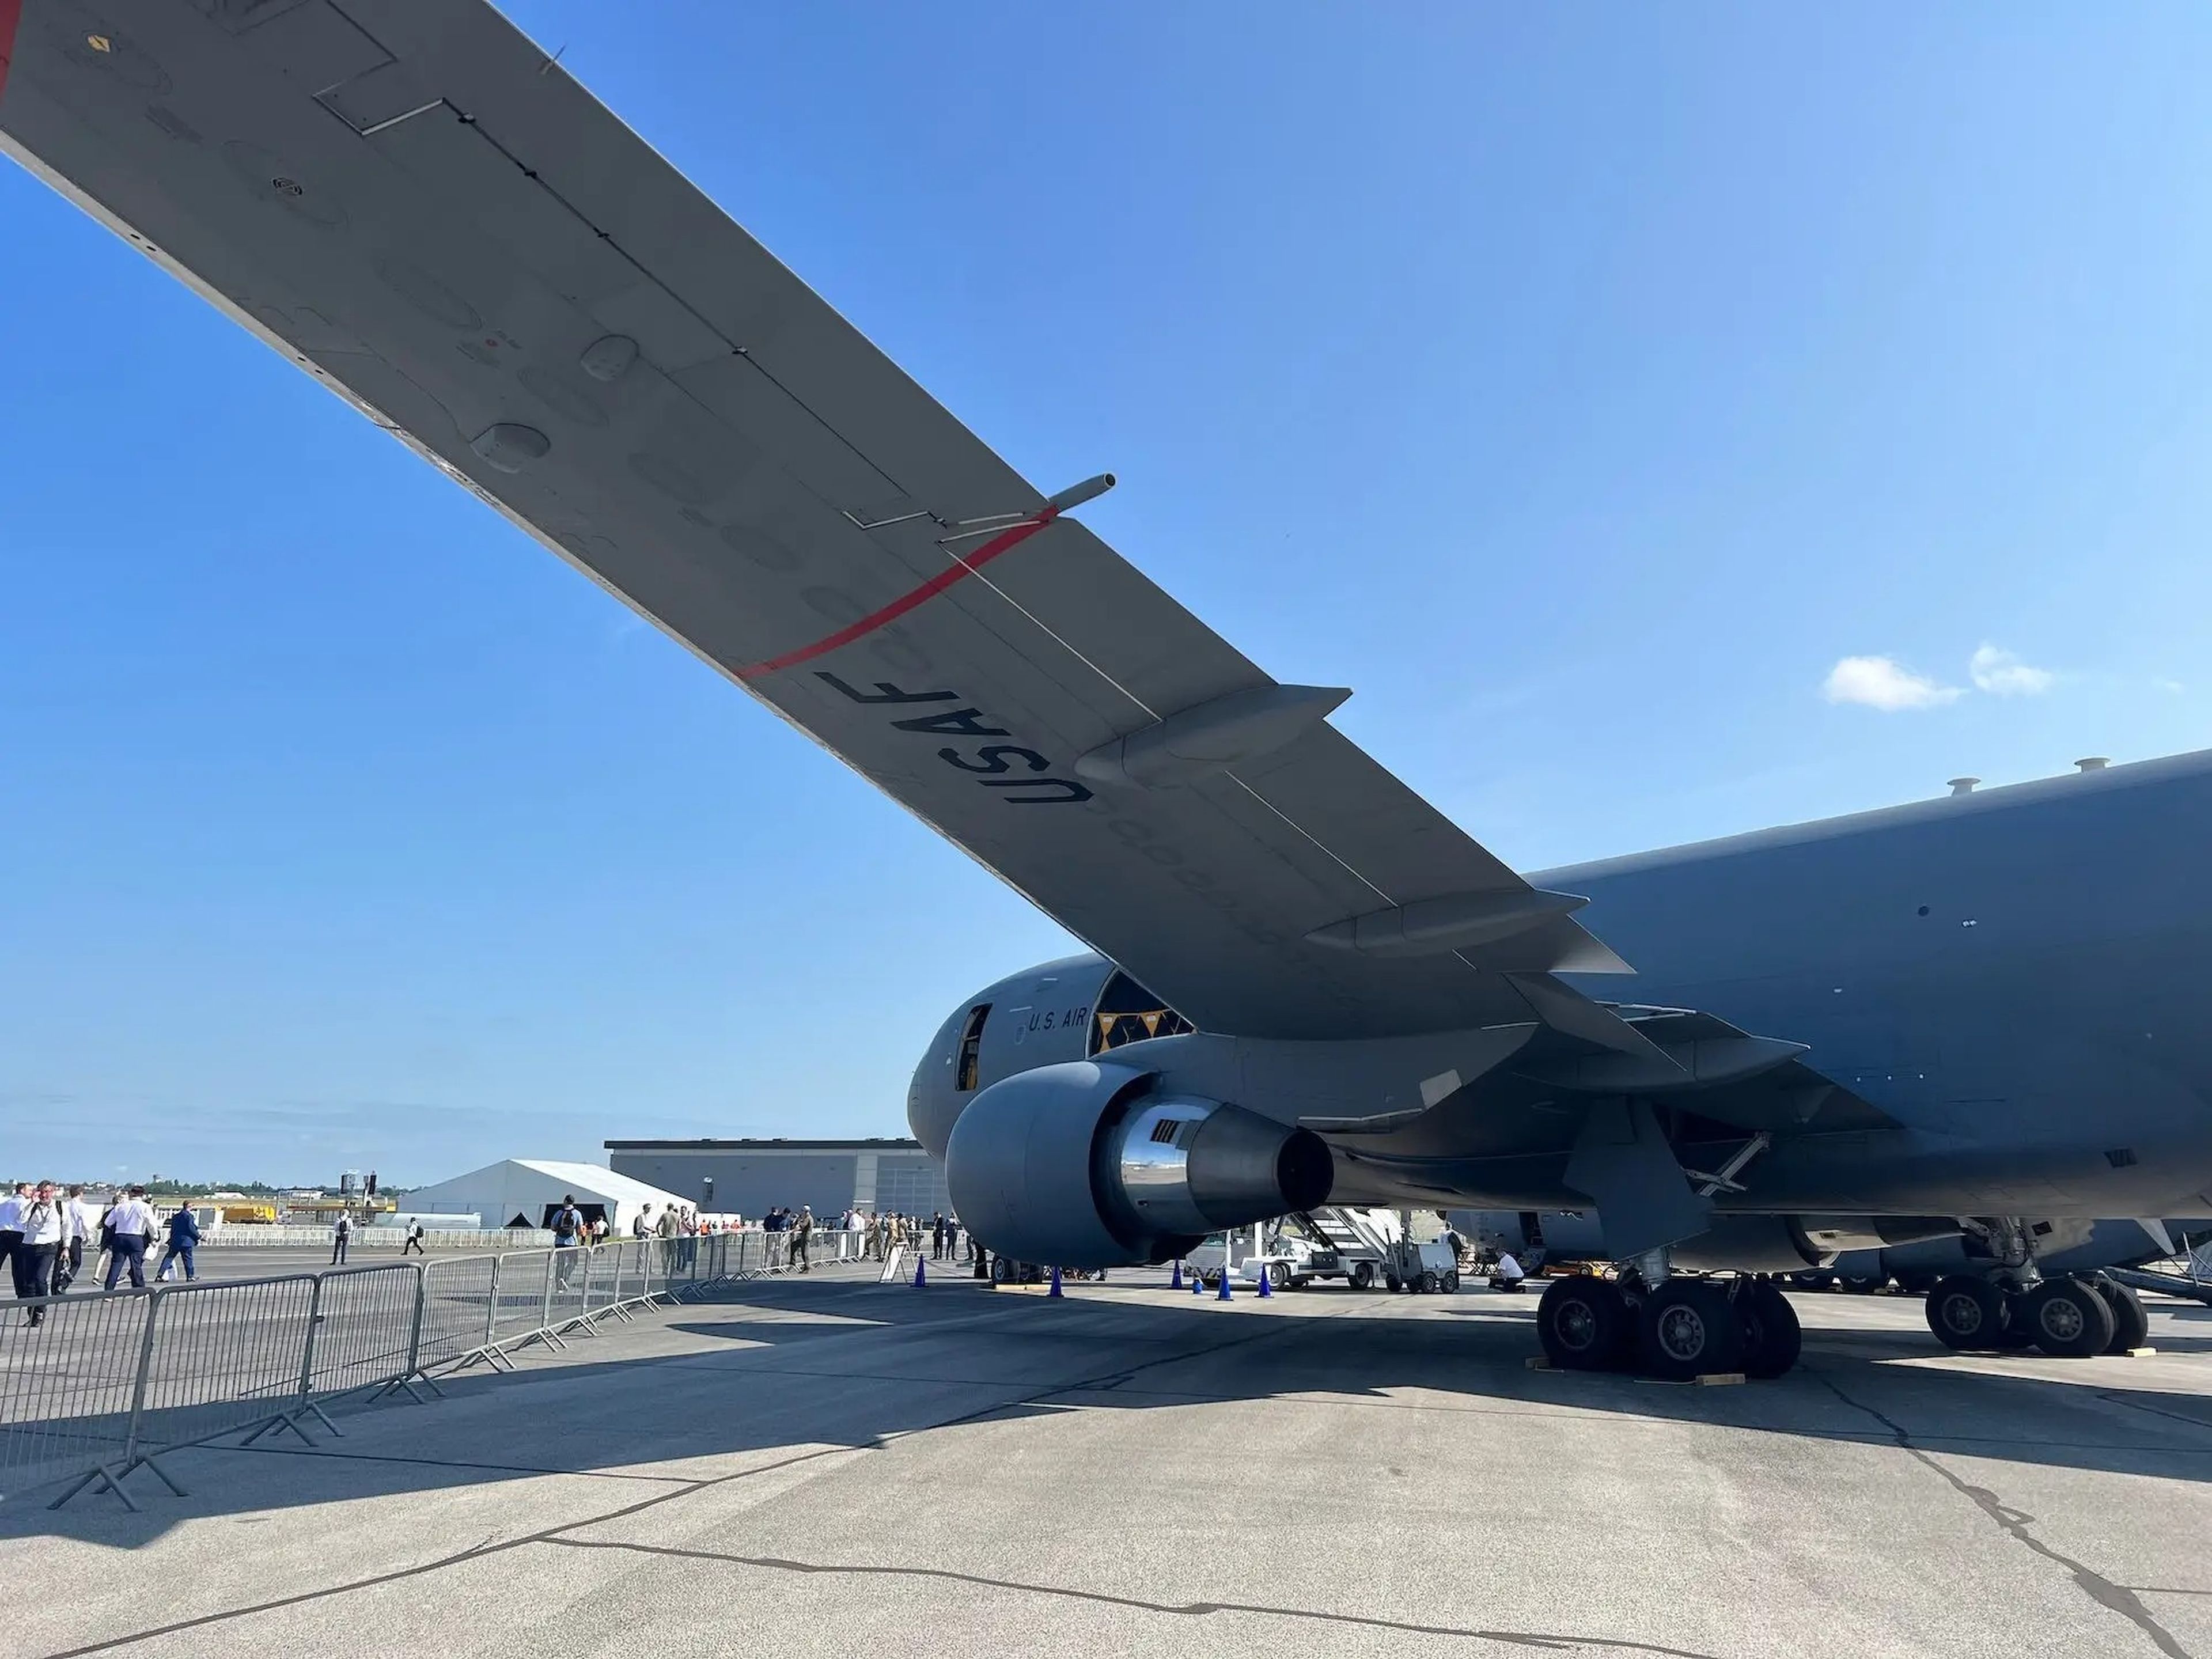 A view of the KC-46 from the left side.